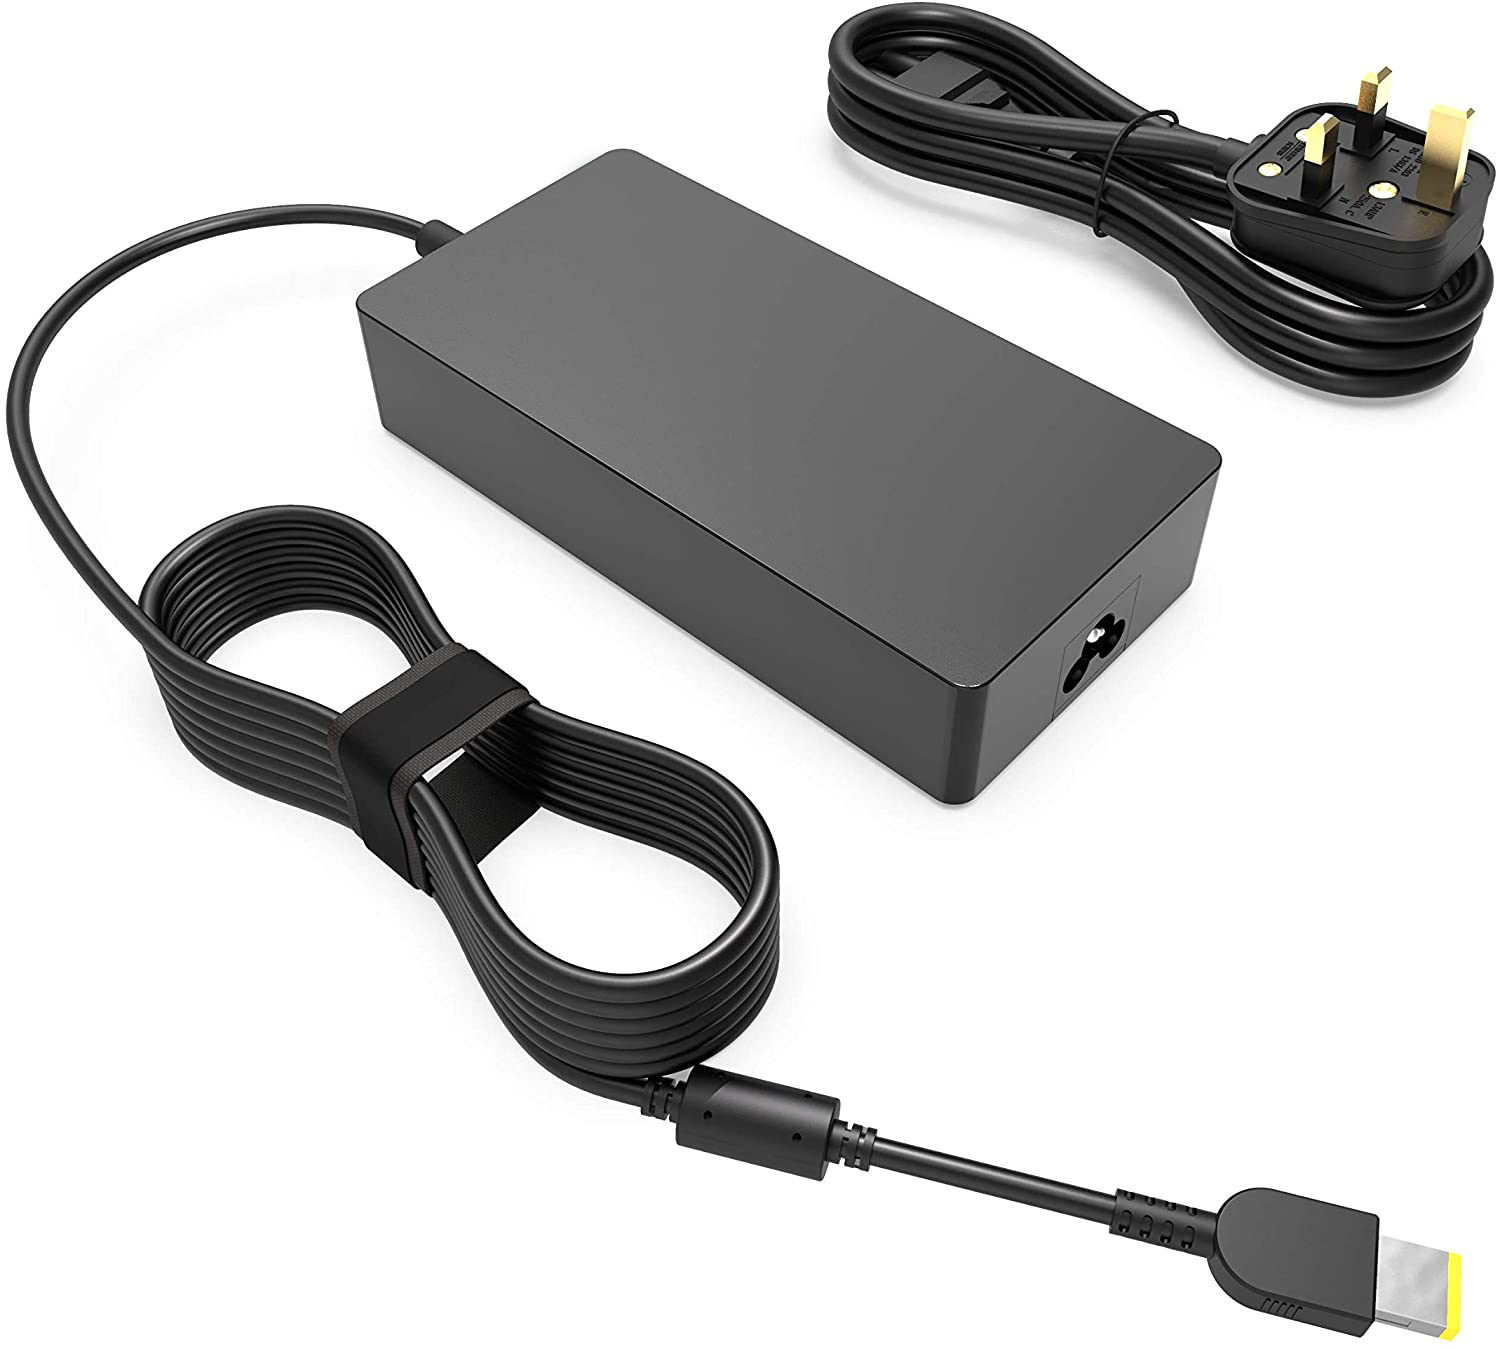 Lenovo ThinkPad P50 Power Adapter Laptop Charger